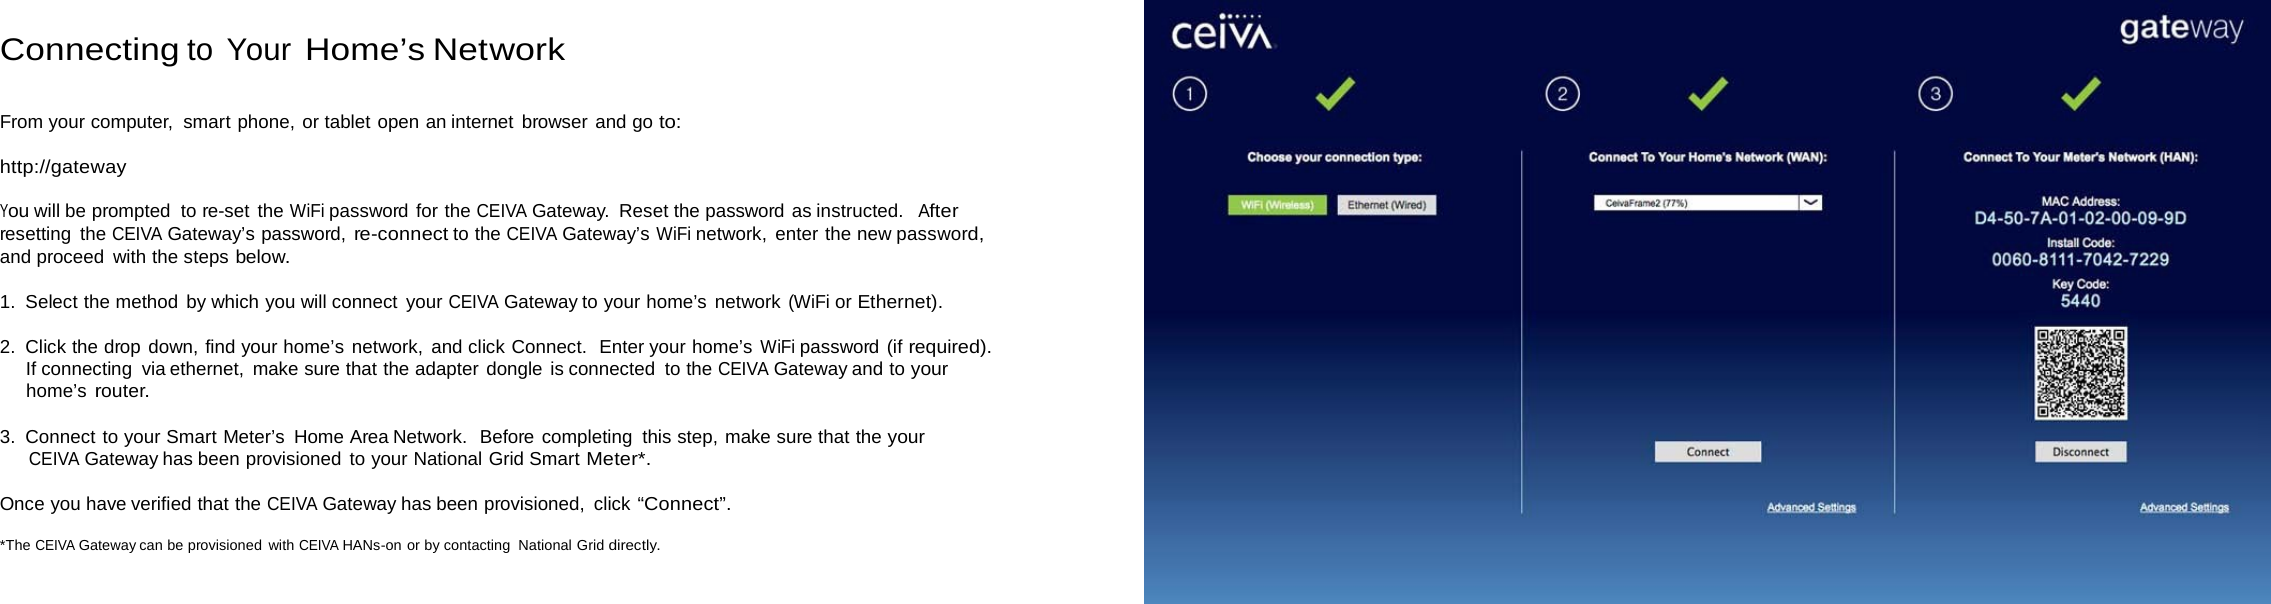   Connecting to Your Home’s Network   From your computer,  smart phone, or tablet open an internet browser and go to:  http://gateway  You will be prompted to re-set the WiFi password for the CEIVA Gateway.  Reset the password as instructed.  After resetting the CEIVA Gateway’s password, re-connect to the CEIVA Gateway’s WiFi network, enter the new password, and proceed with the steps below.  1. Select the method by which you will connect your CEIVA Gateway to your home’s network (WiFi or Ethernet).  2. Click the drop down, find your home’s network, and click Connect.  Enter your home’s WiFi password (if required). If connecting via ethernet, make sure that the adapter dongle is connected to the CEIVA Gateway and to your home’s router.  3. Connect to your Smart Meter’s Home Area Network.  Before completing this step, make sure that the your CEIVA Gateway has been provisioned to your National Grid Smart Meter*.  Once you have verified that the CEIVA Gateway has been provisioned, click “Connect”.  *The CEIVA Gateway can be provisioned with CEIVA HANs-on or by contacting National Grid directly. 